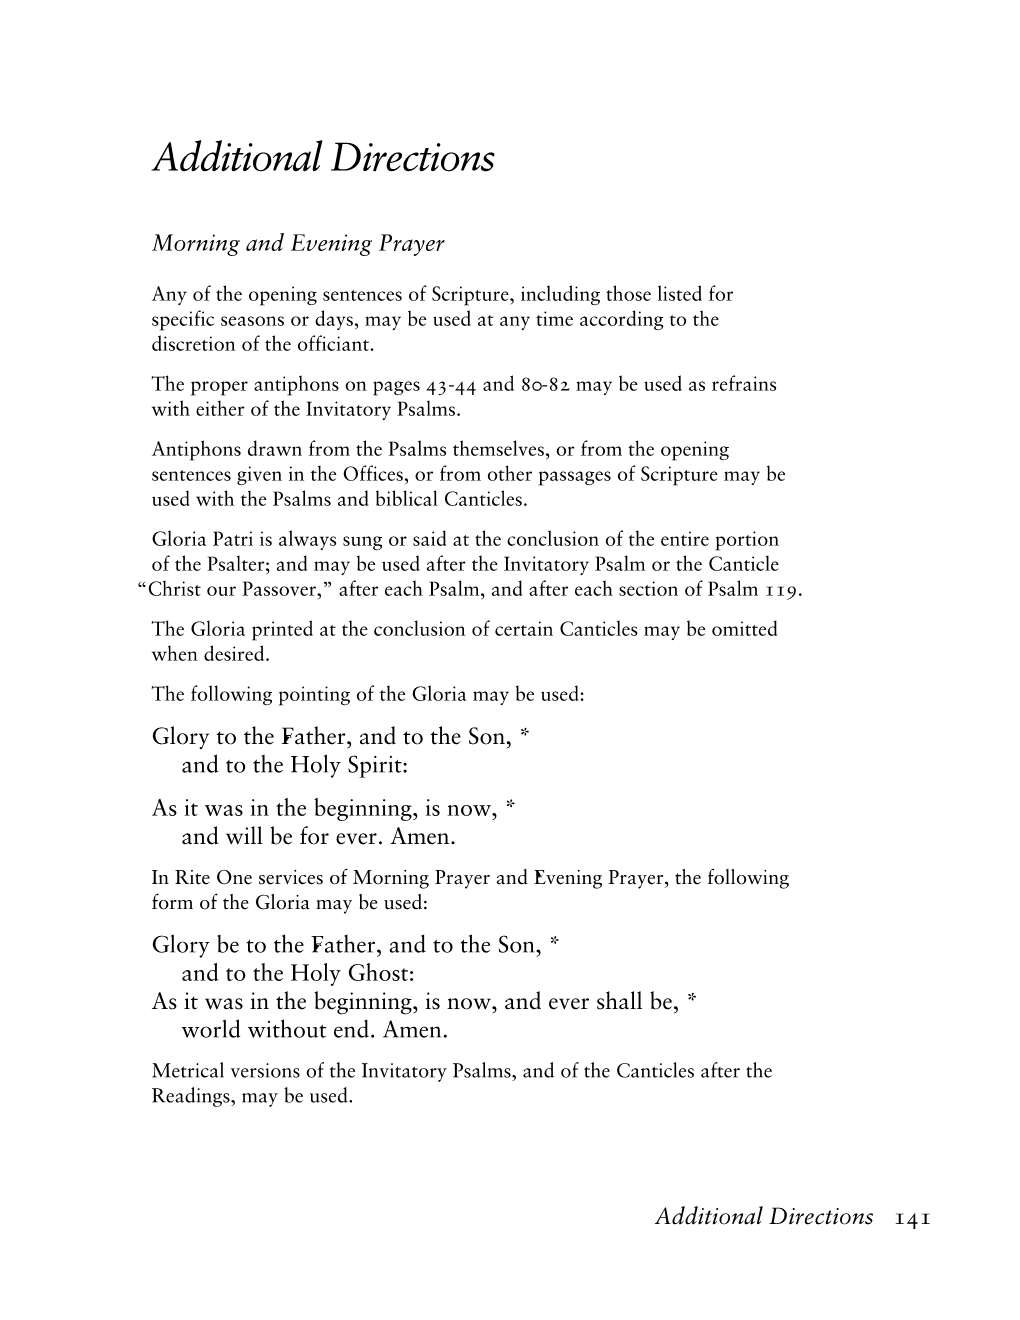 Directions for Morning and Evening Prayer